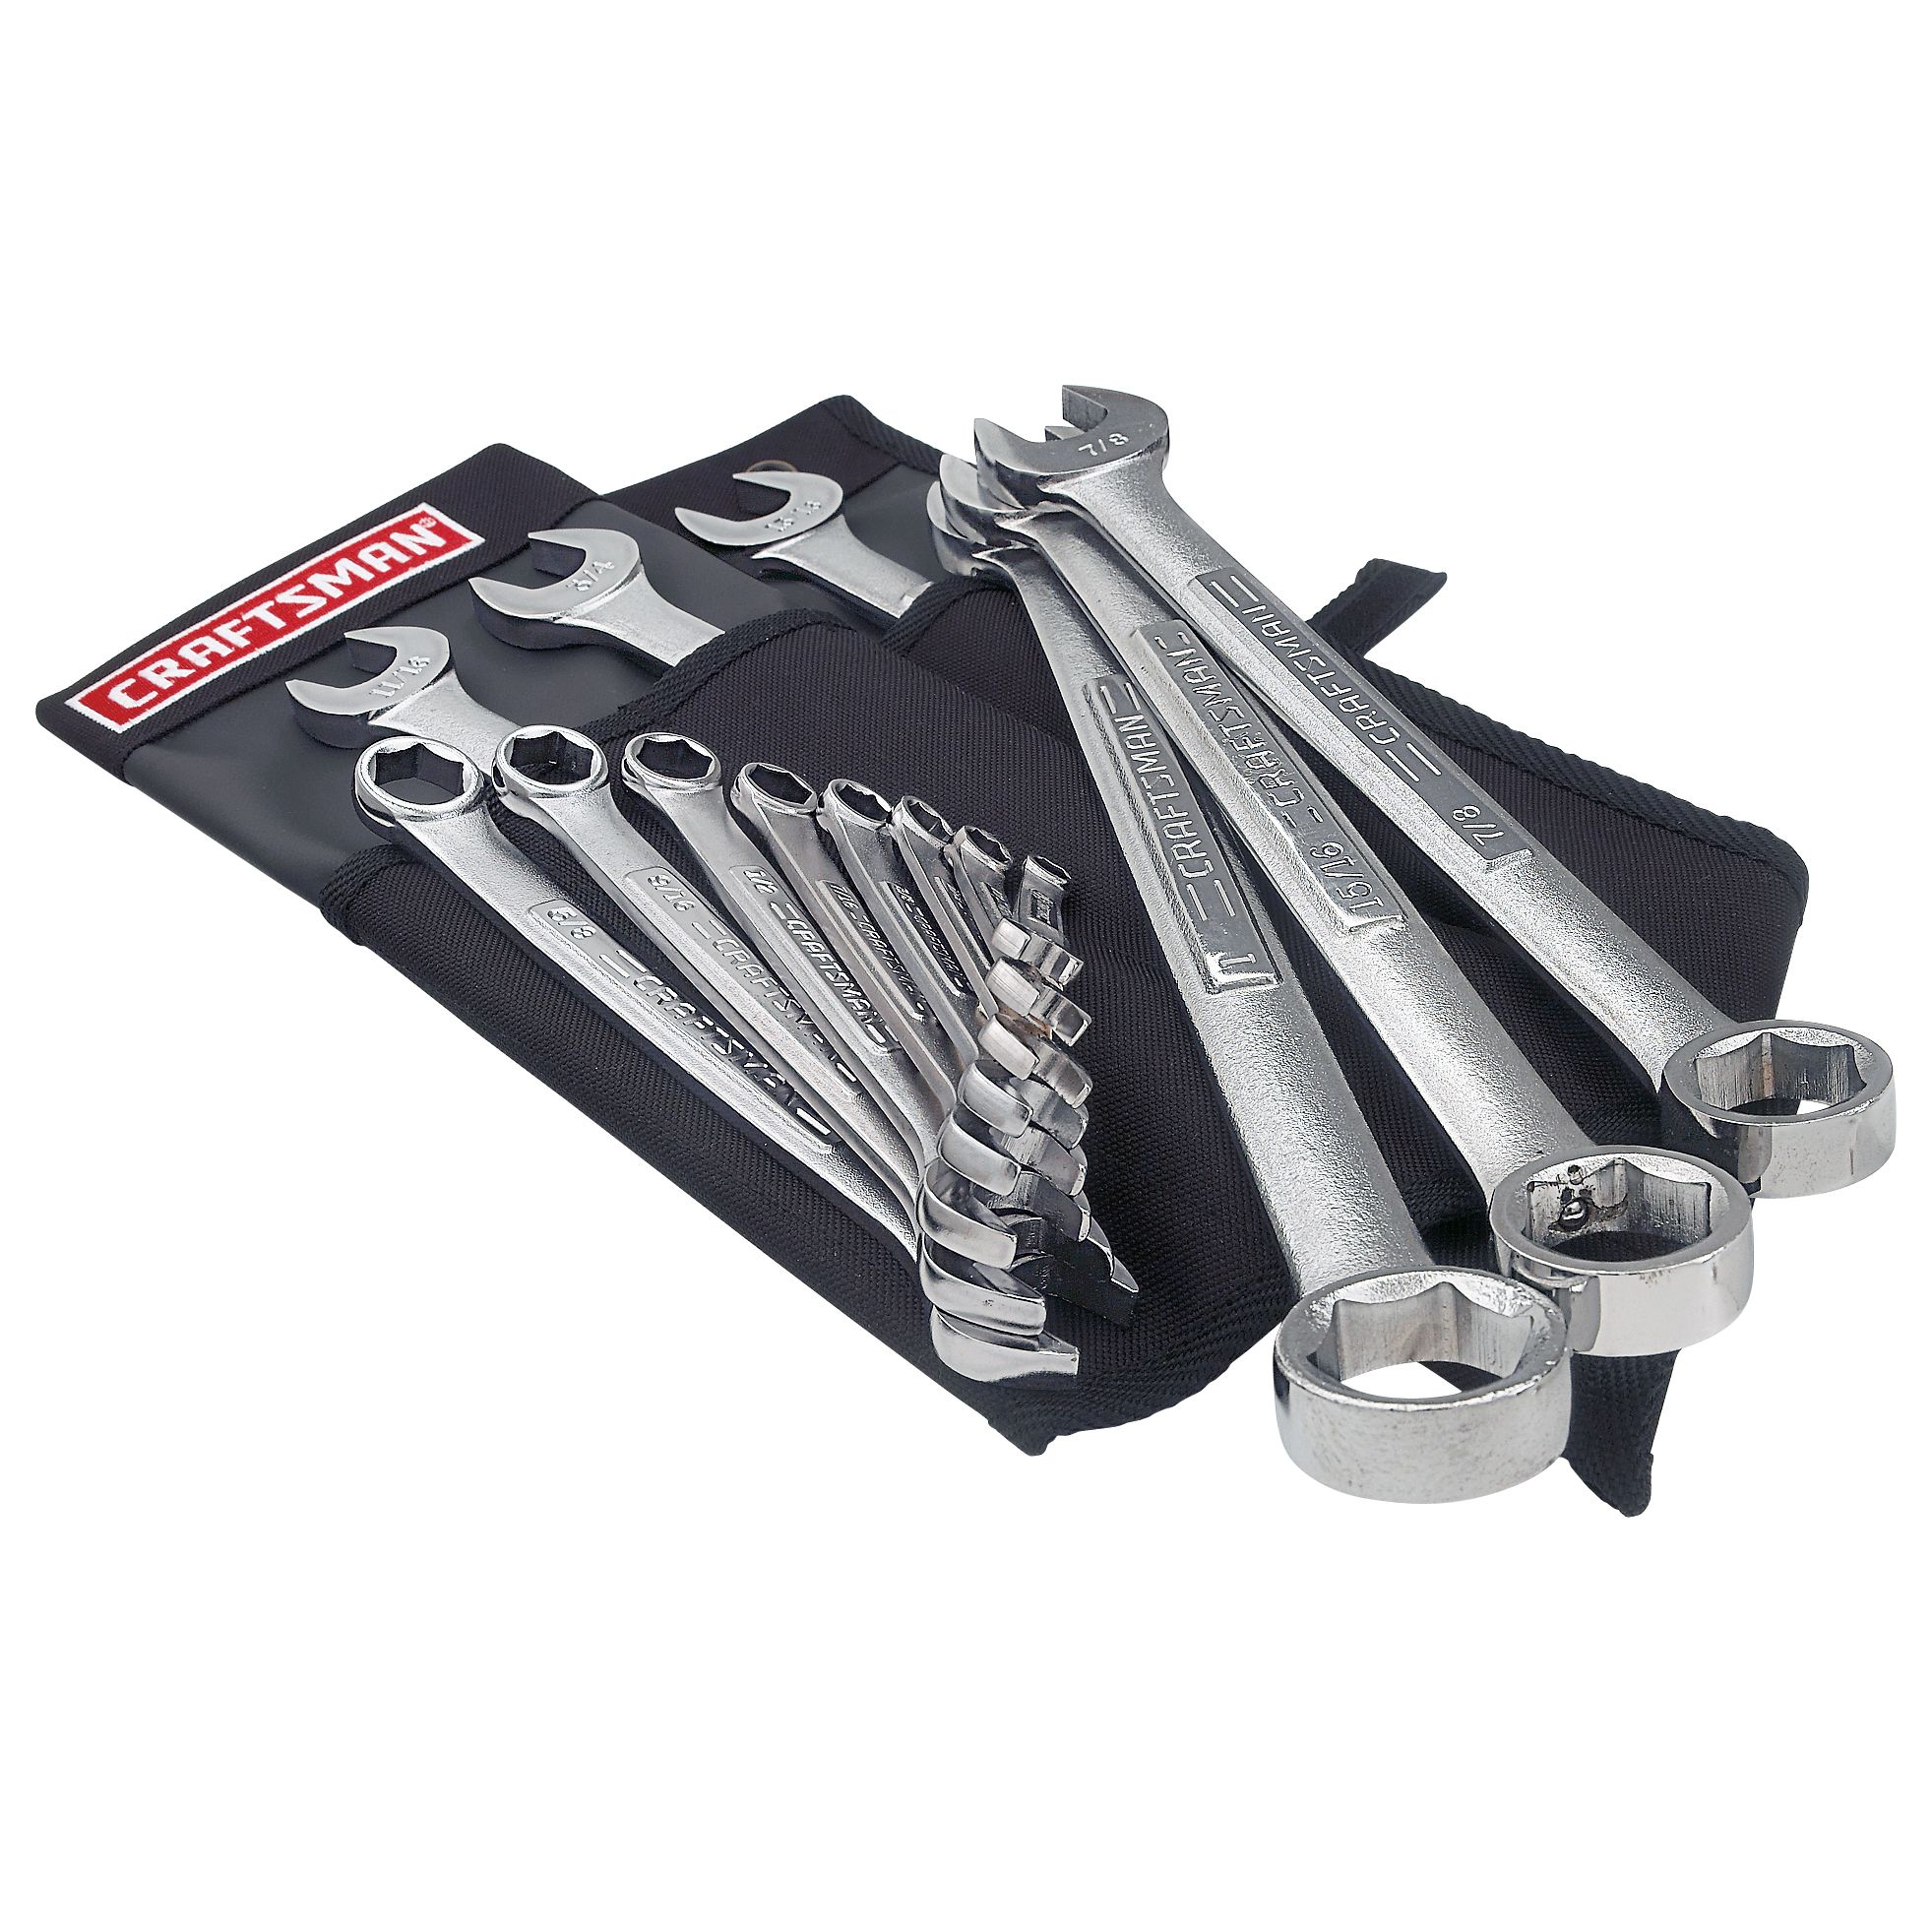 Craftsman 14 pc. Standard 6 pt. Combination Wrench Set with Deluxe Roll Pouch